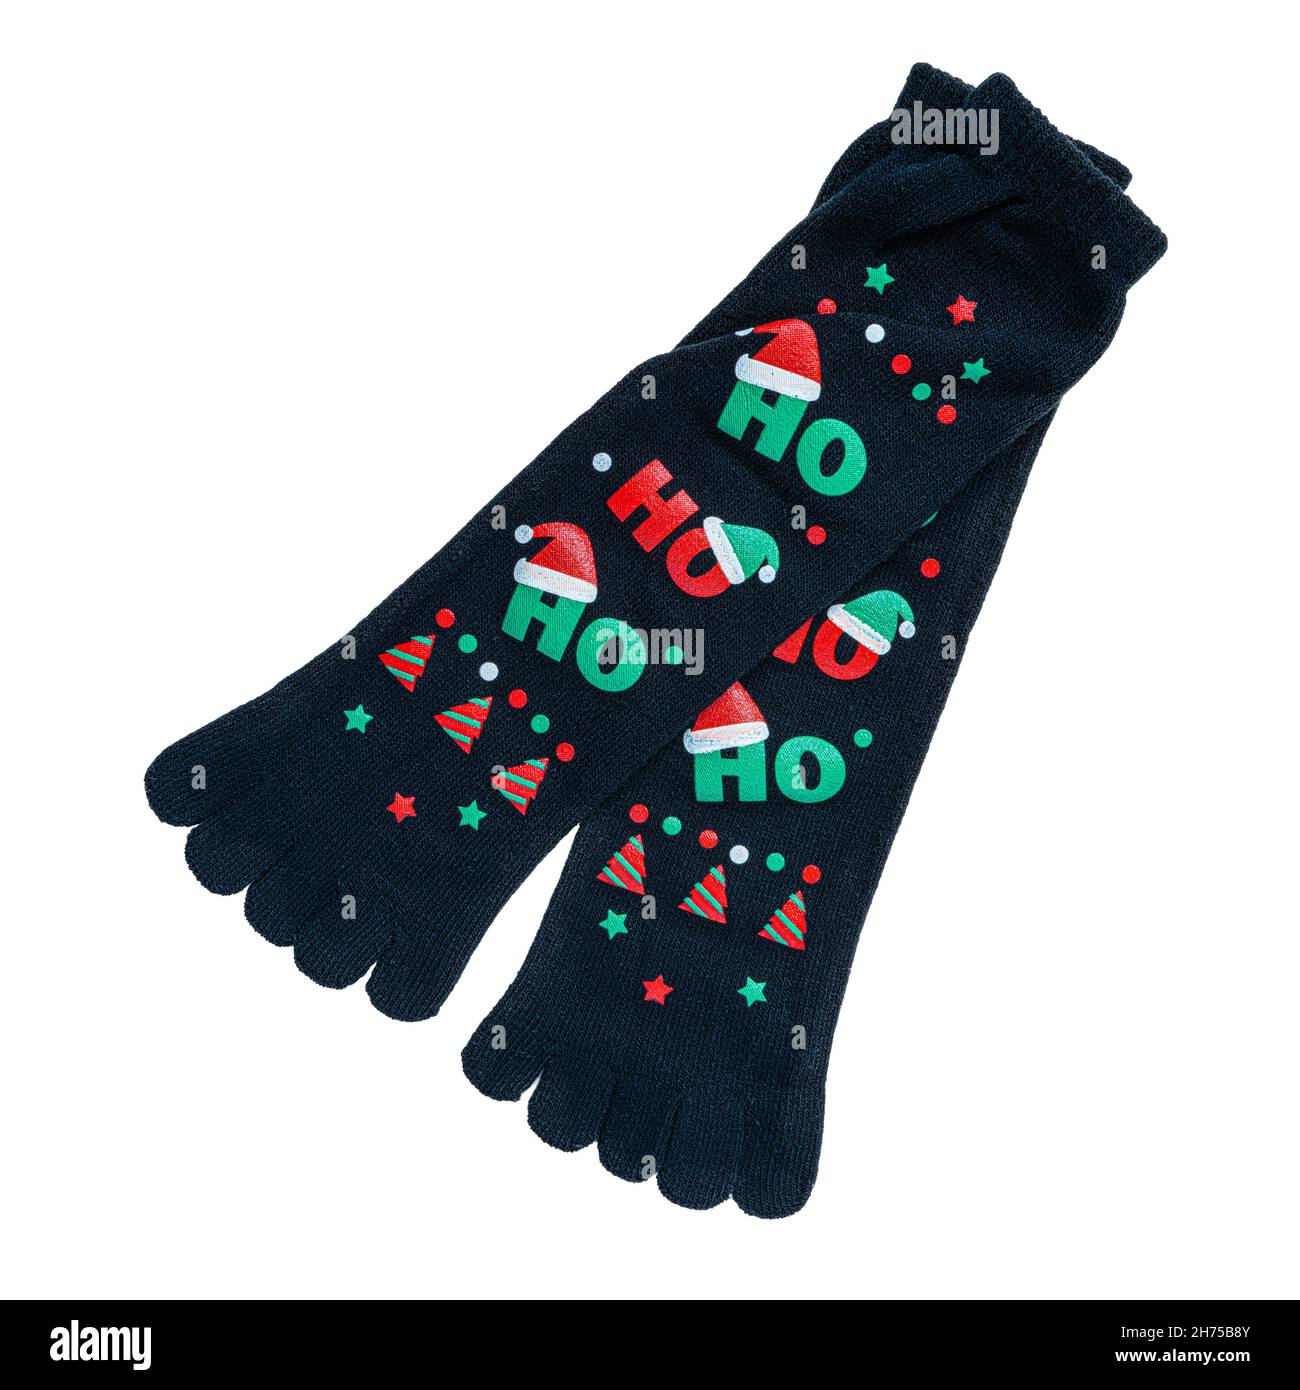 Christmas socks complete with toes. Stock Photo